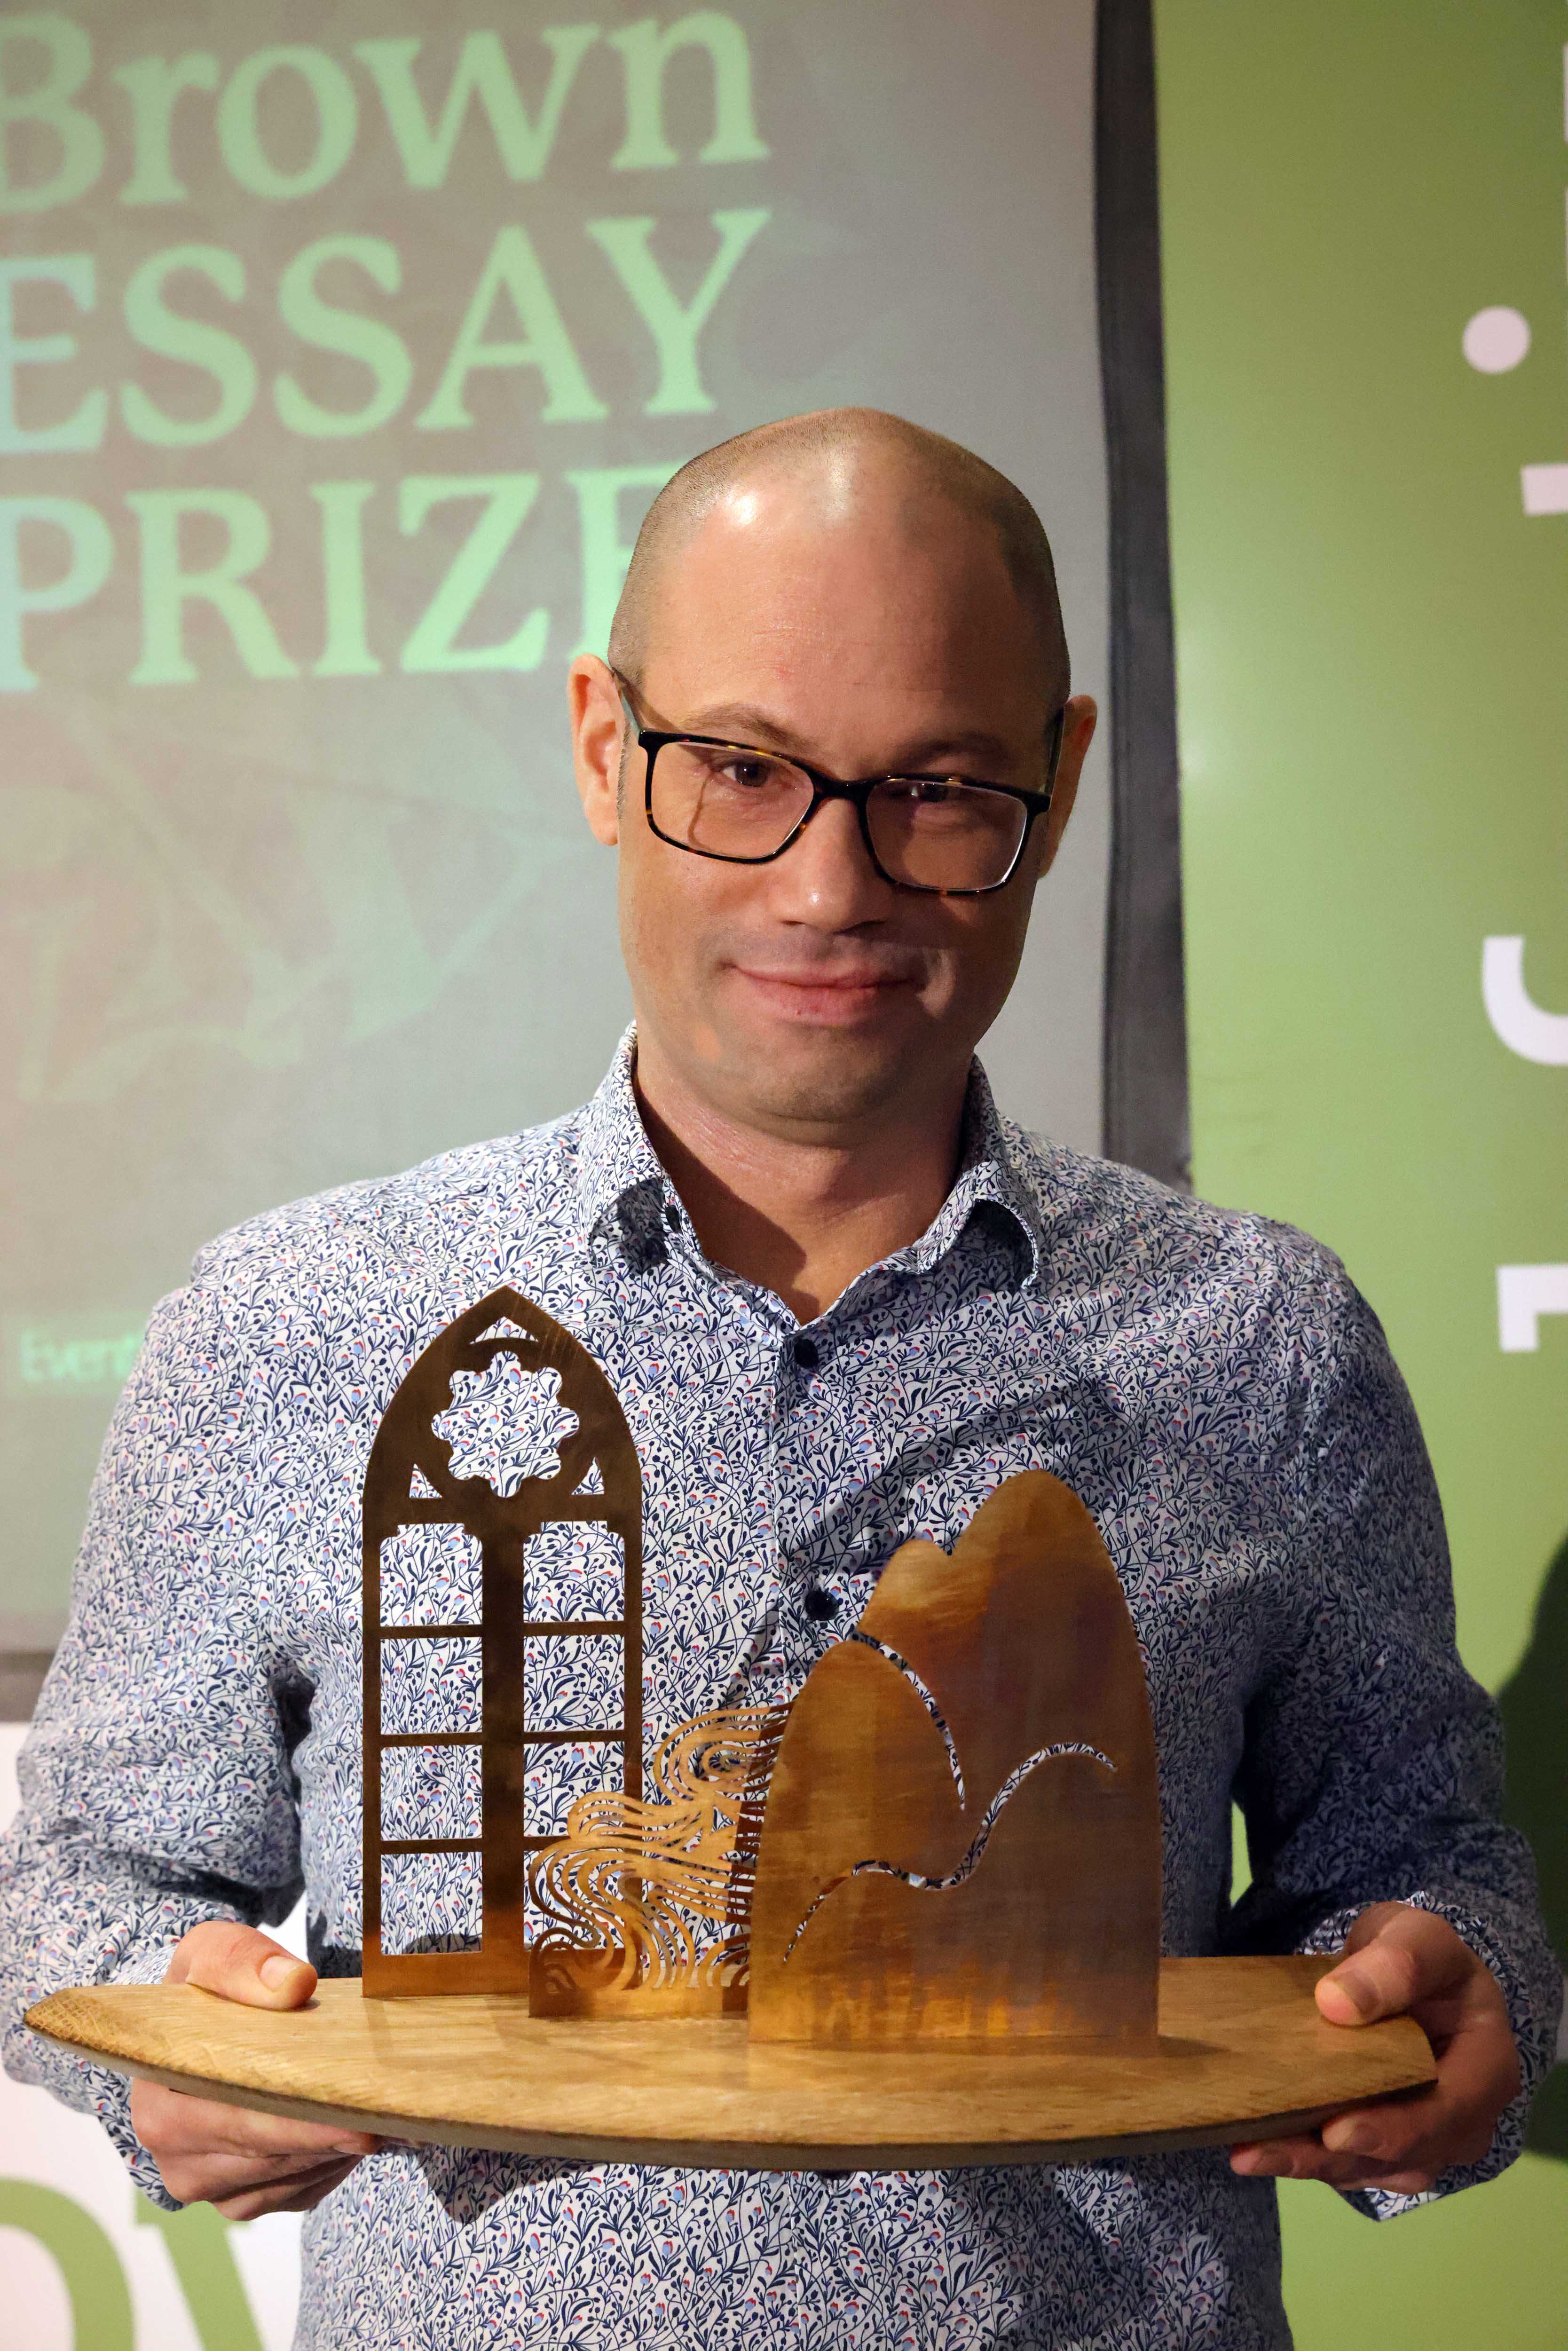 Author Rodge Glass holds the Anne Brown Essay Prize trophy.